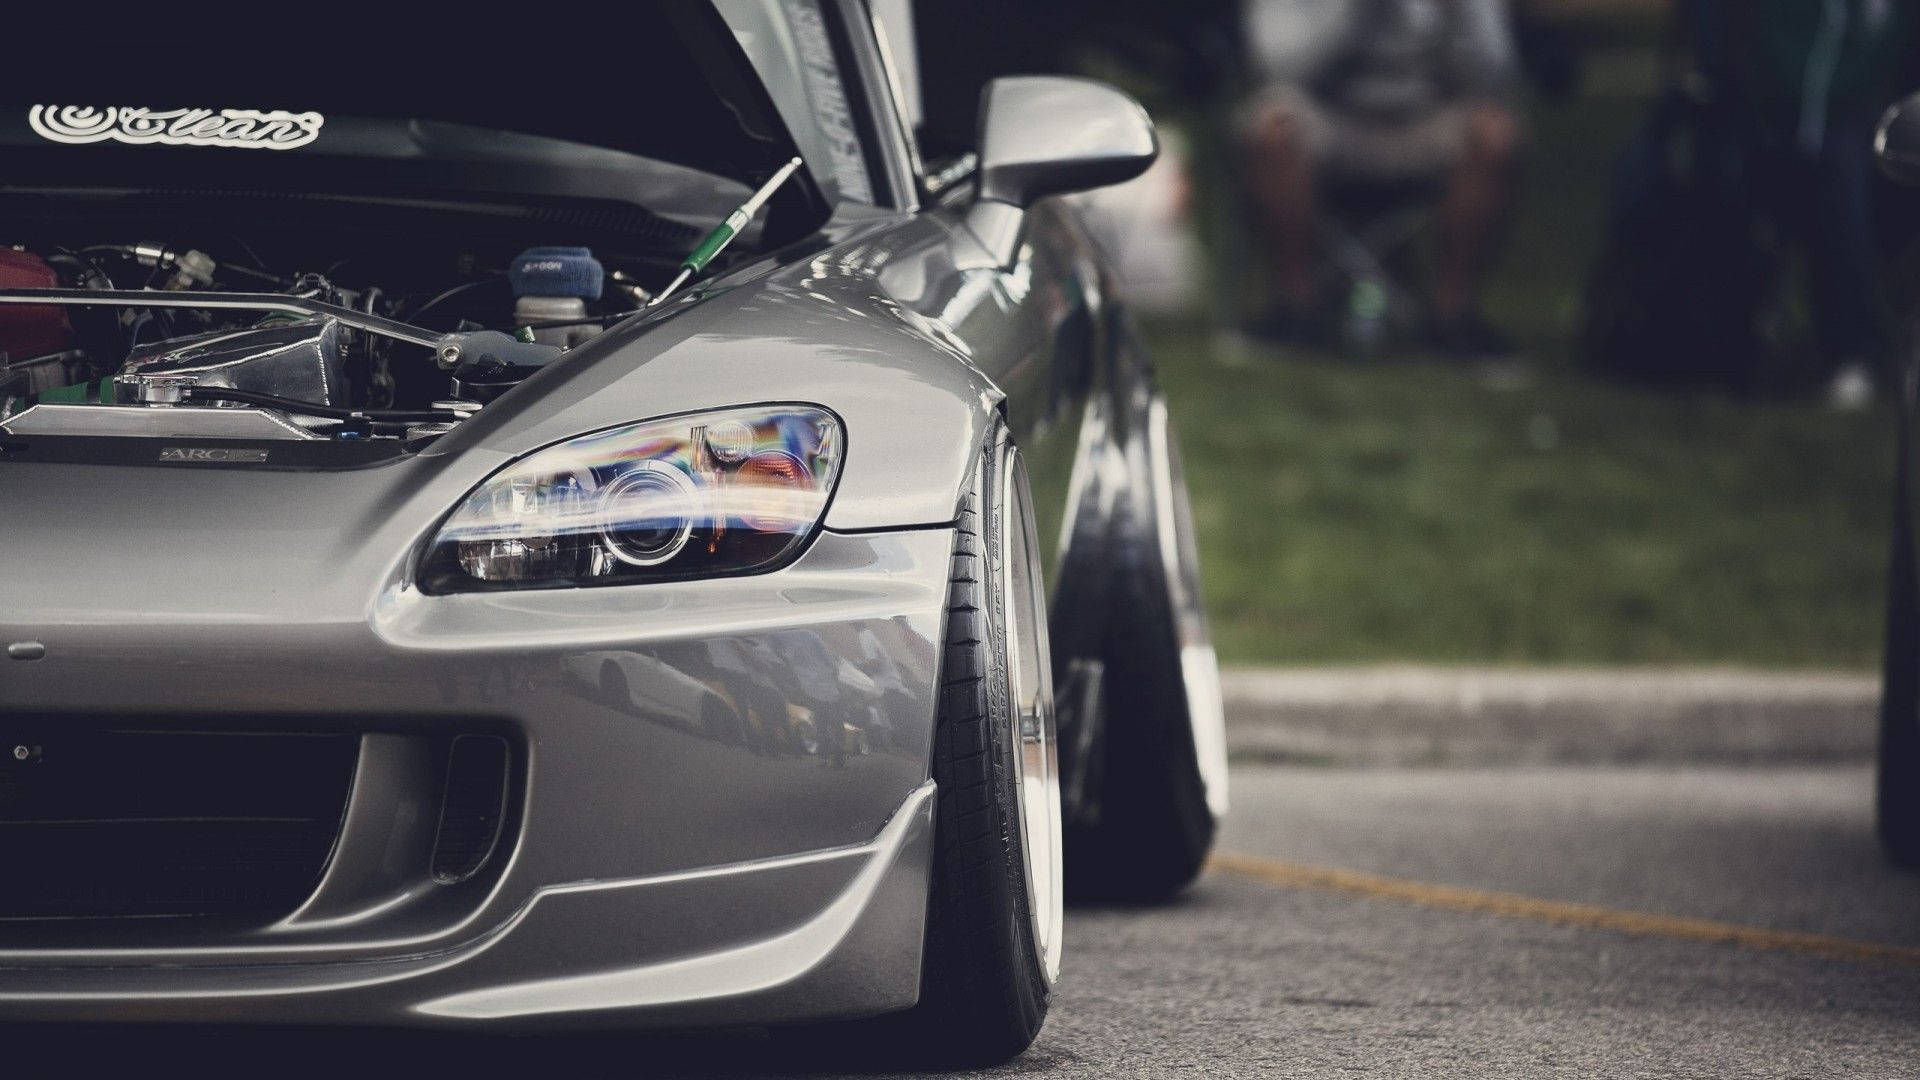 Gray Jdm Car Front Close Up Background